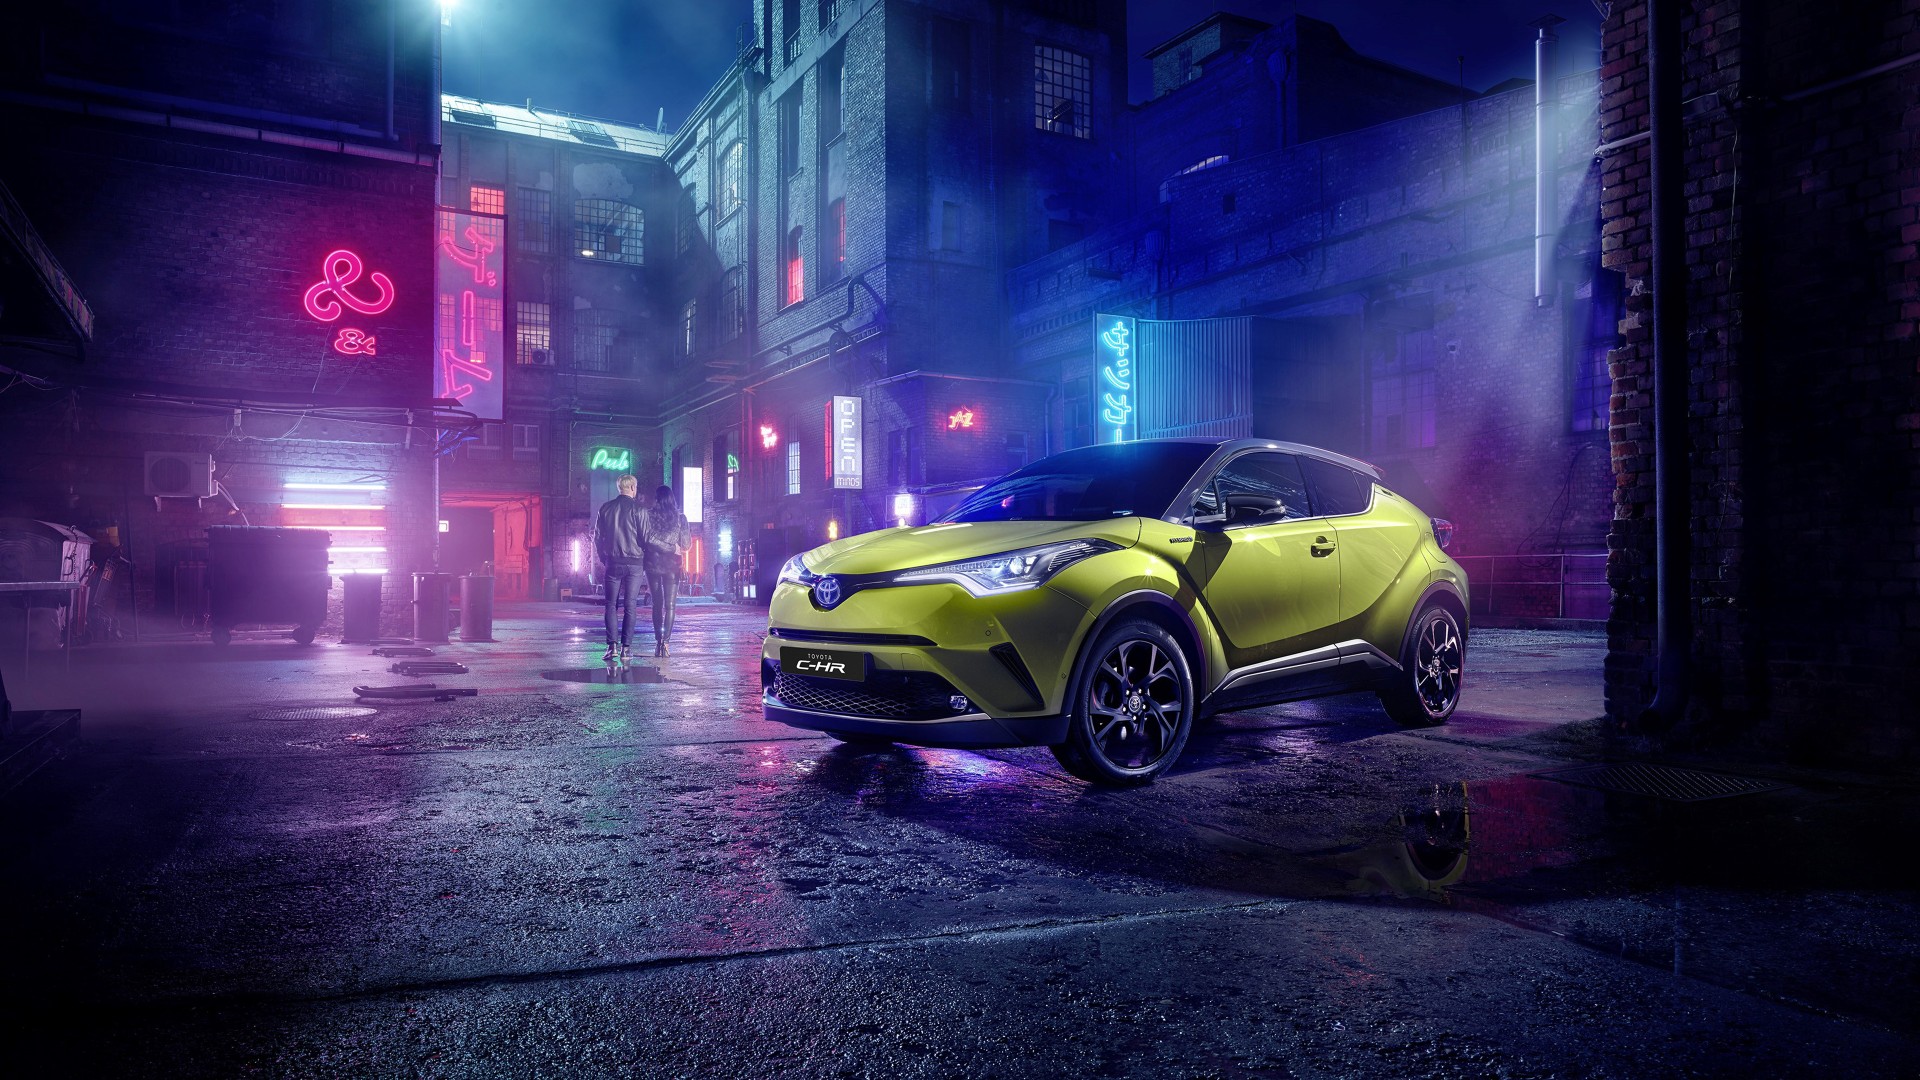 Toyota C-HR Neon Lime powered by JBL 2019 4K Wallpaper | HD Car Wallpapers | ID #12392